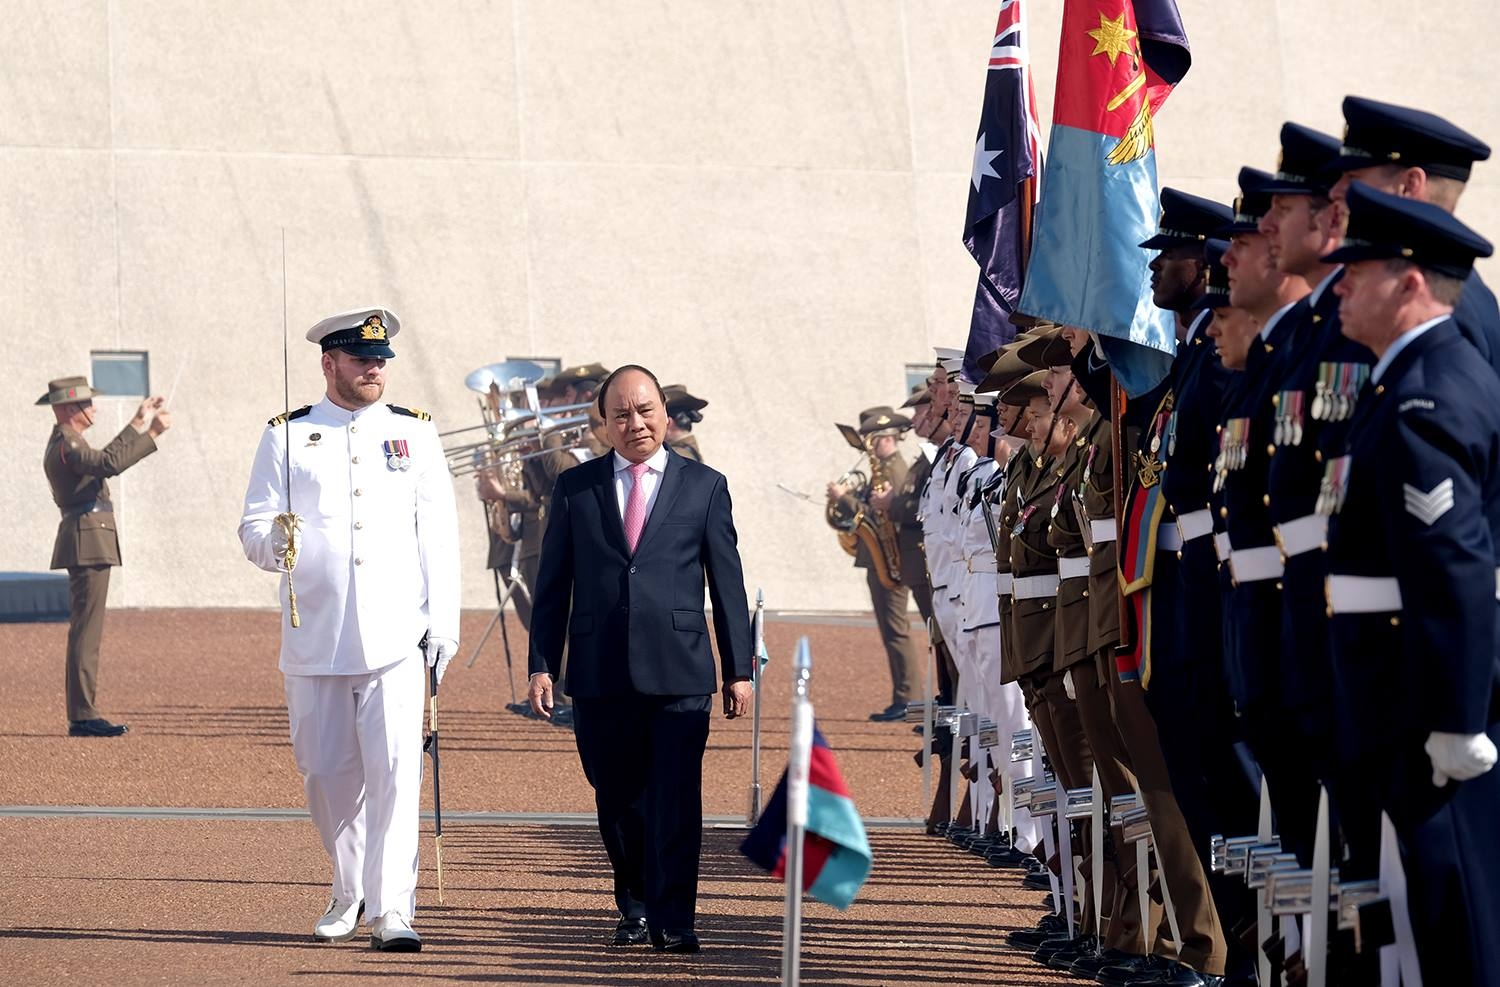 pm phuc greeted by australian counterpart with a 19 gun salute